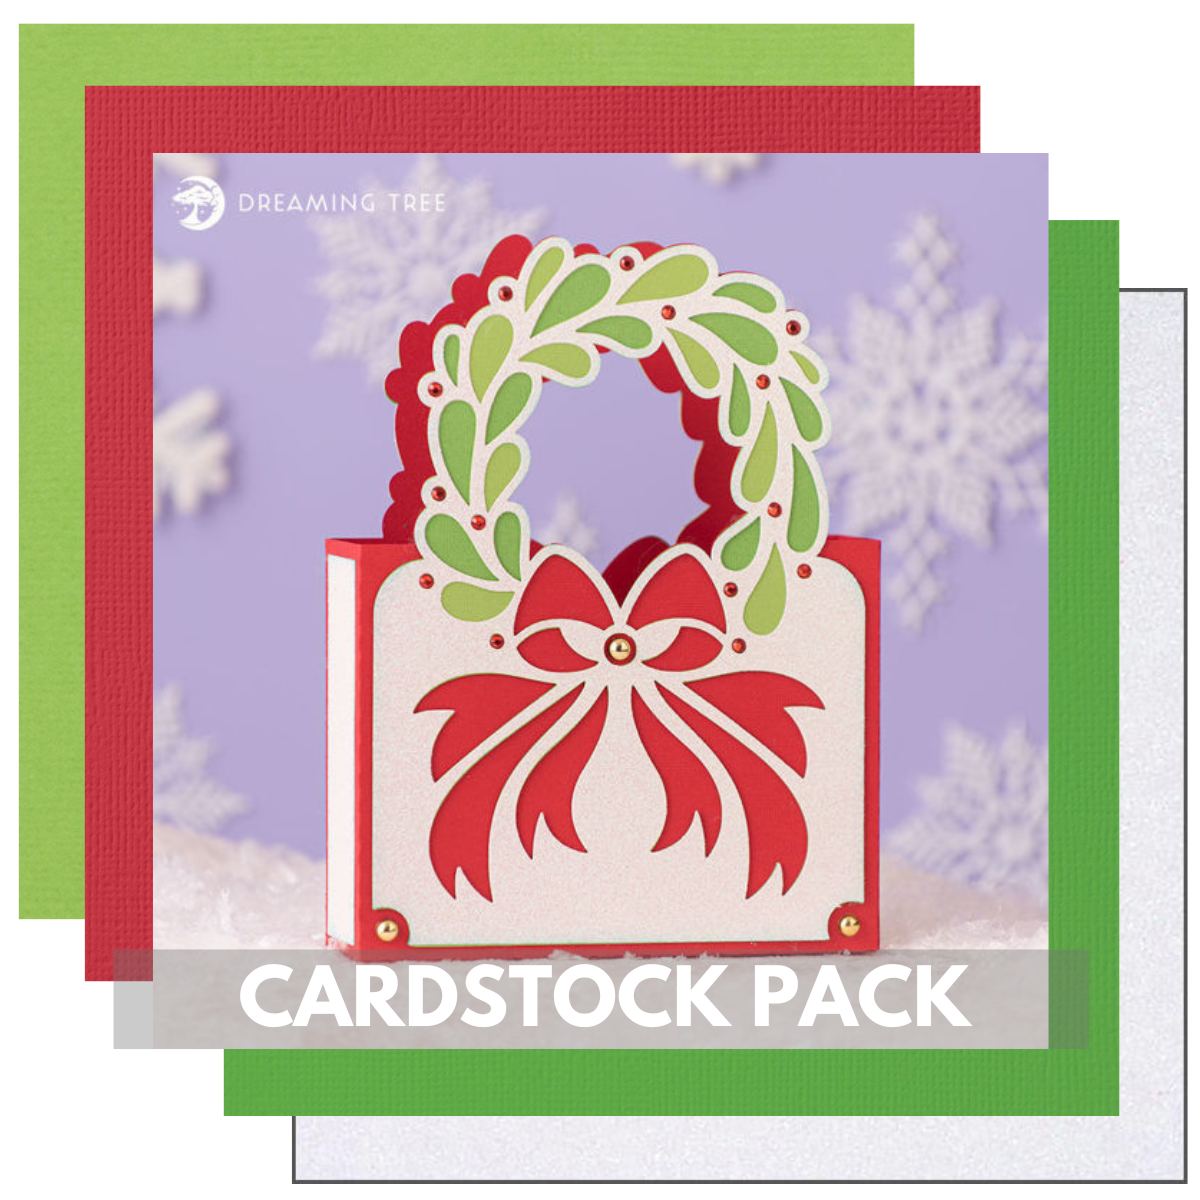 DREAMING TREE CHRISTMAS CARDS CACHE TOTE KIT - 13 Sheets - 12x12 Cardstock Shop